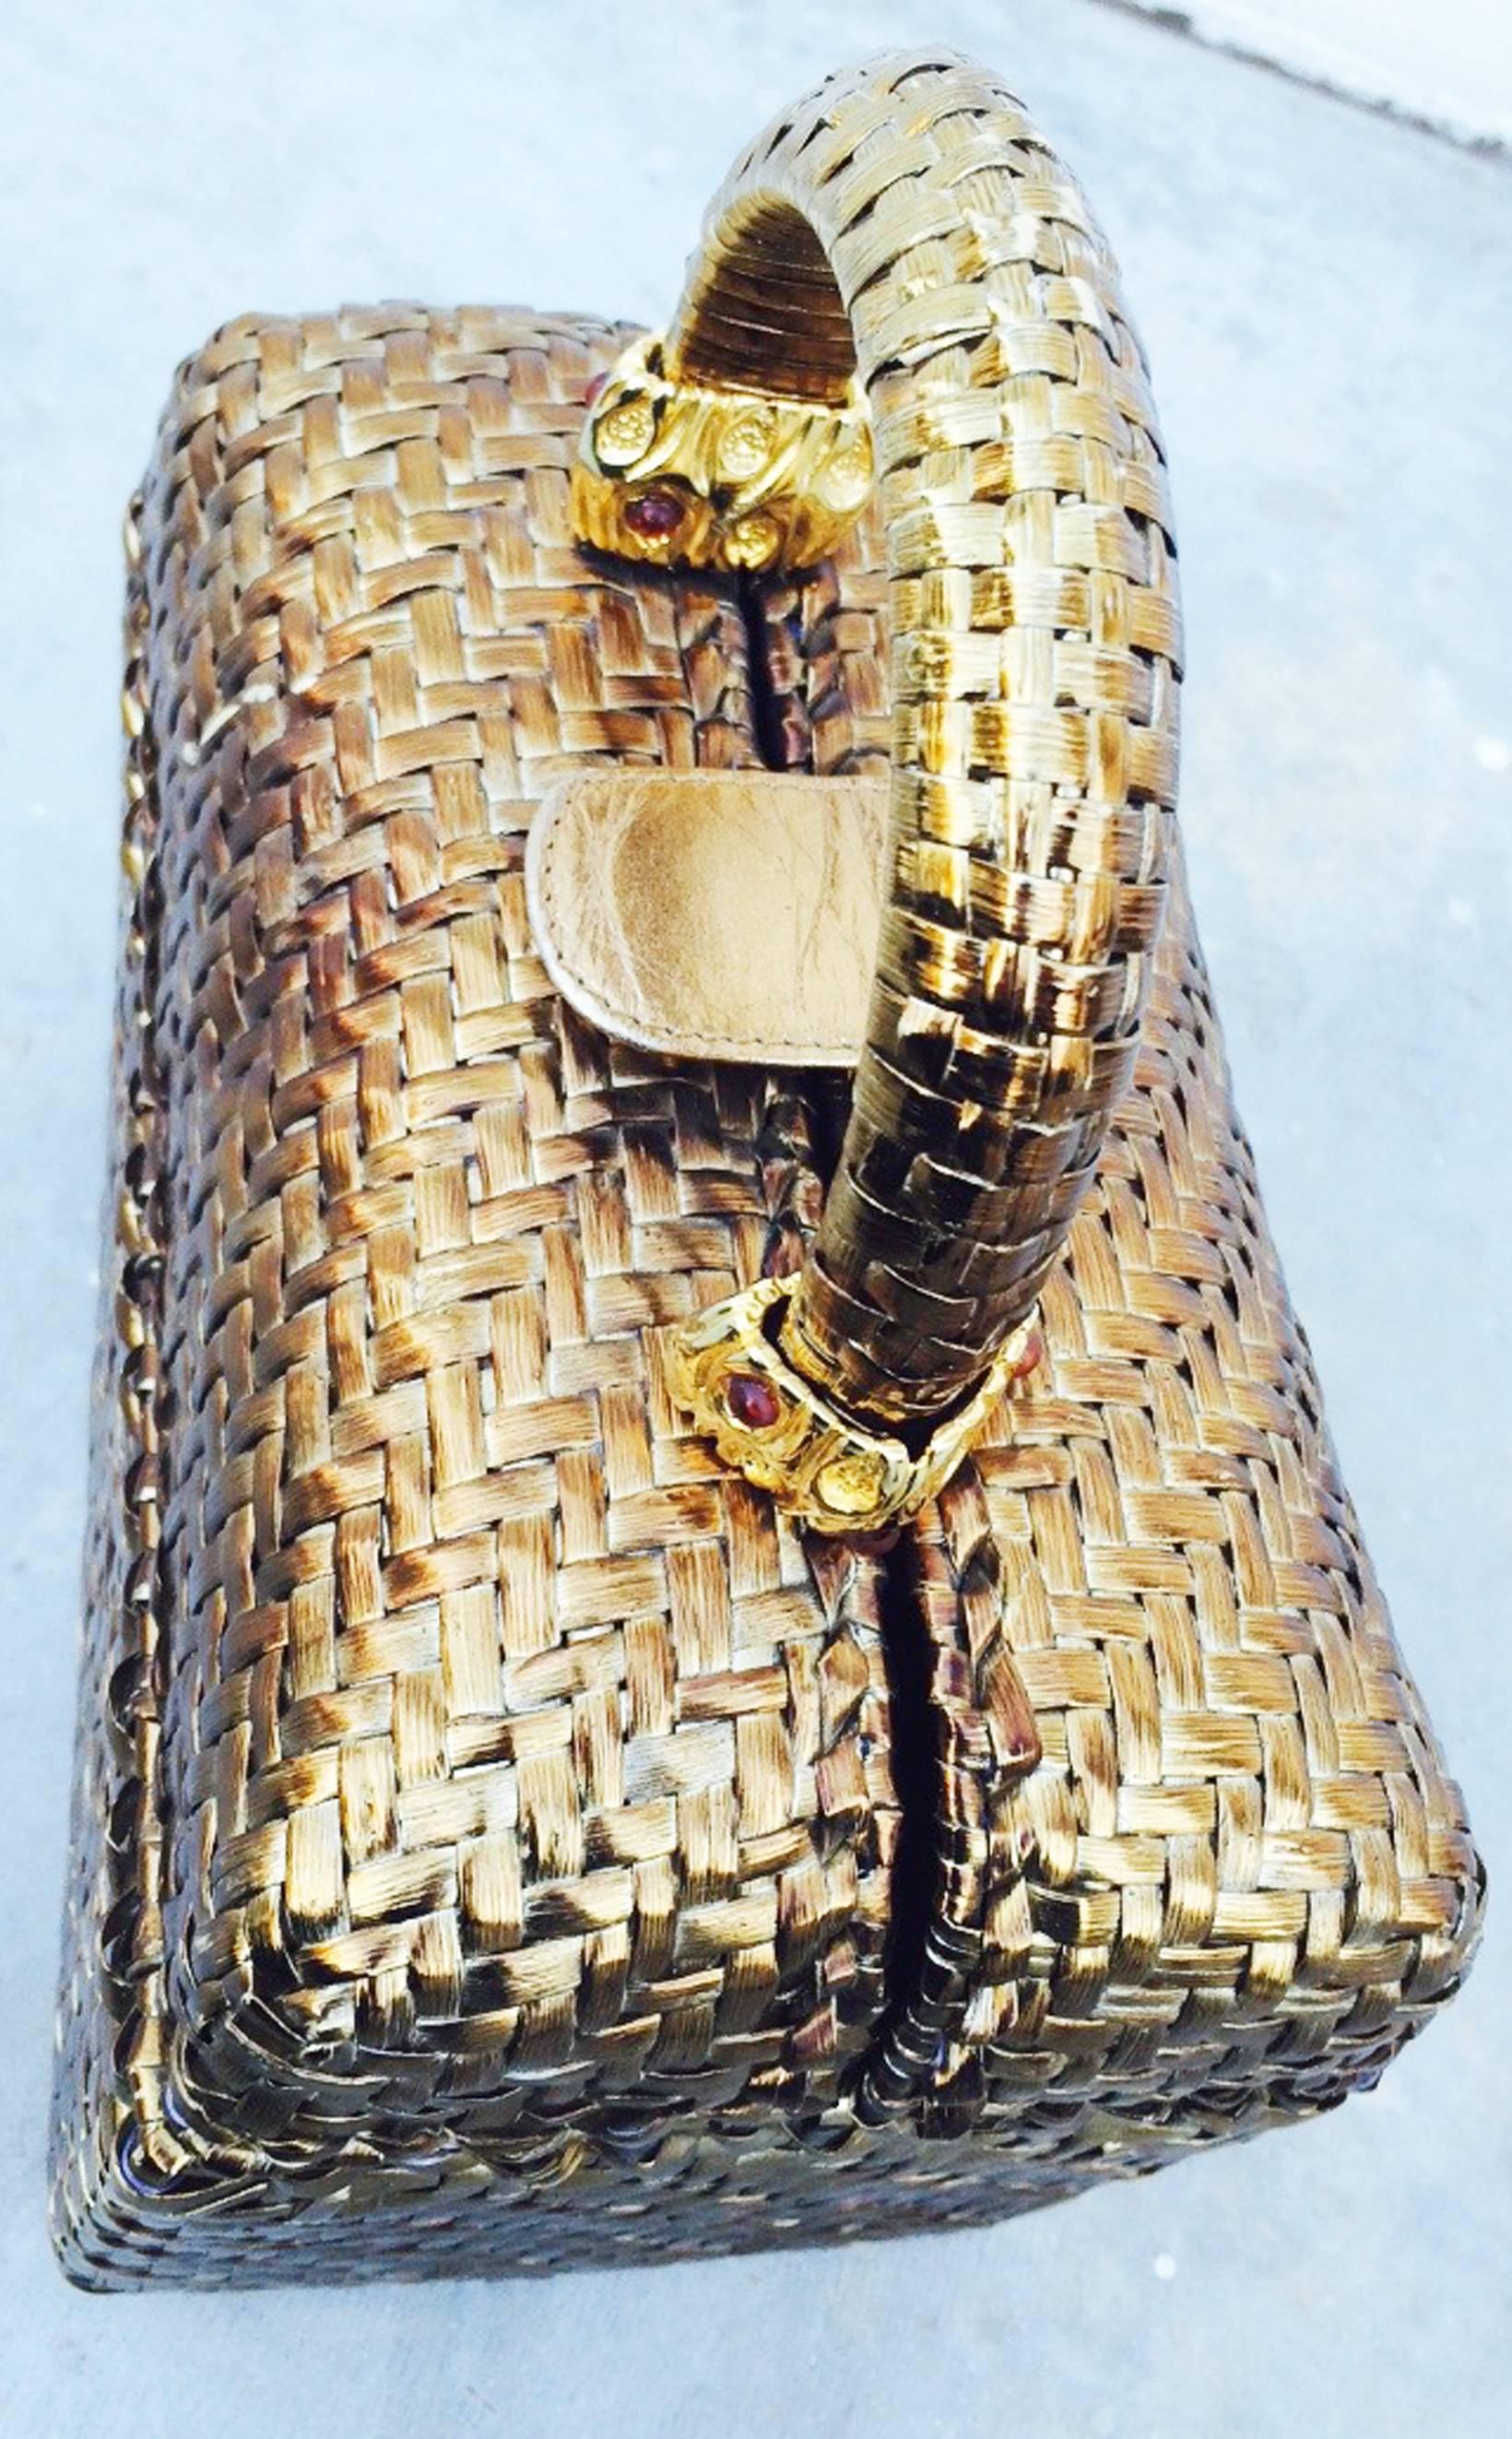 A fine vintage Rodo wicker evening handbag. Gilt gold lacquered woven wicker item features a leather covered snap closure, gilt metal hardware and black vinyl lined interior. Bag includes a 2.75